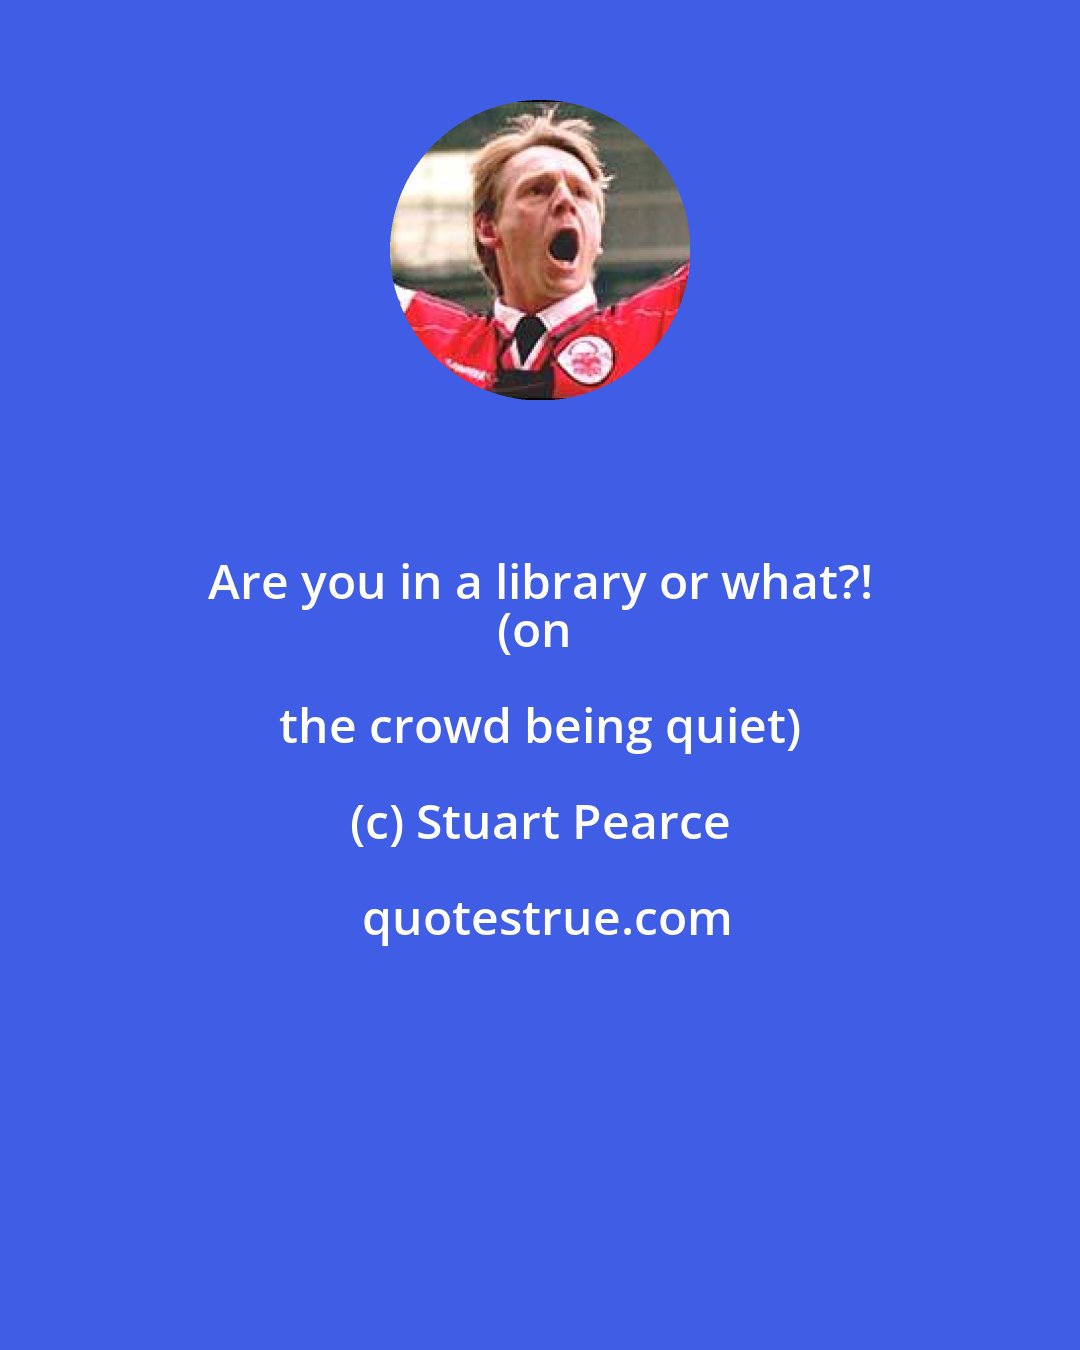 Stuart Pearce: Are you in a library or what?! 
(on the crowd being quiet)